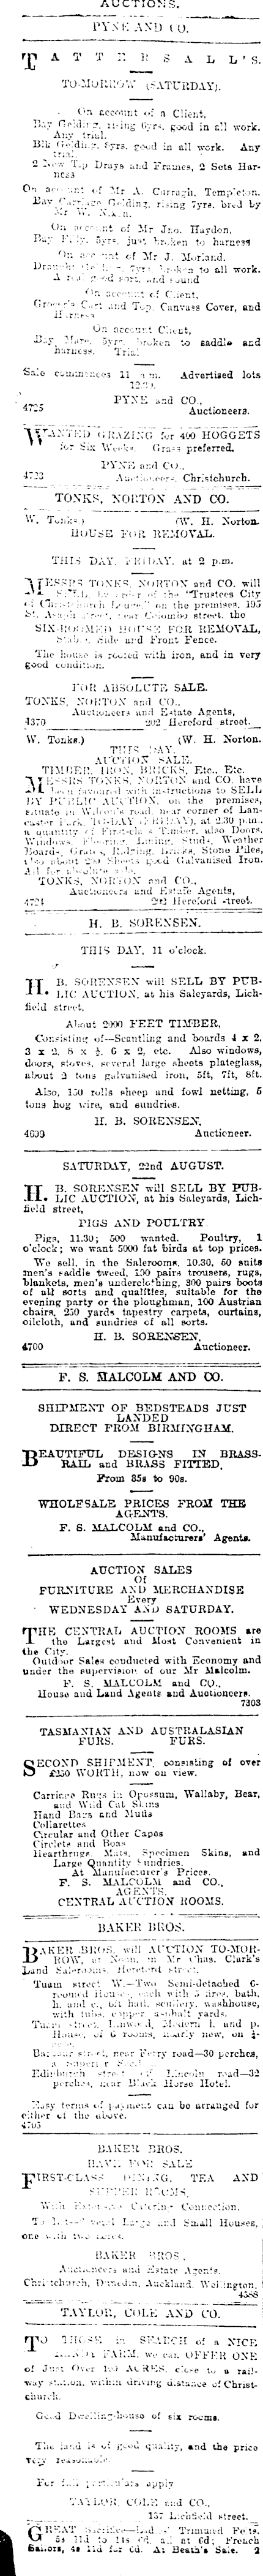 Papers Past Newspapers Press 21 August 1903 Page 8 Advertisements Column 1